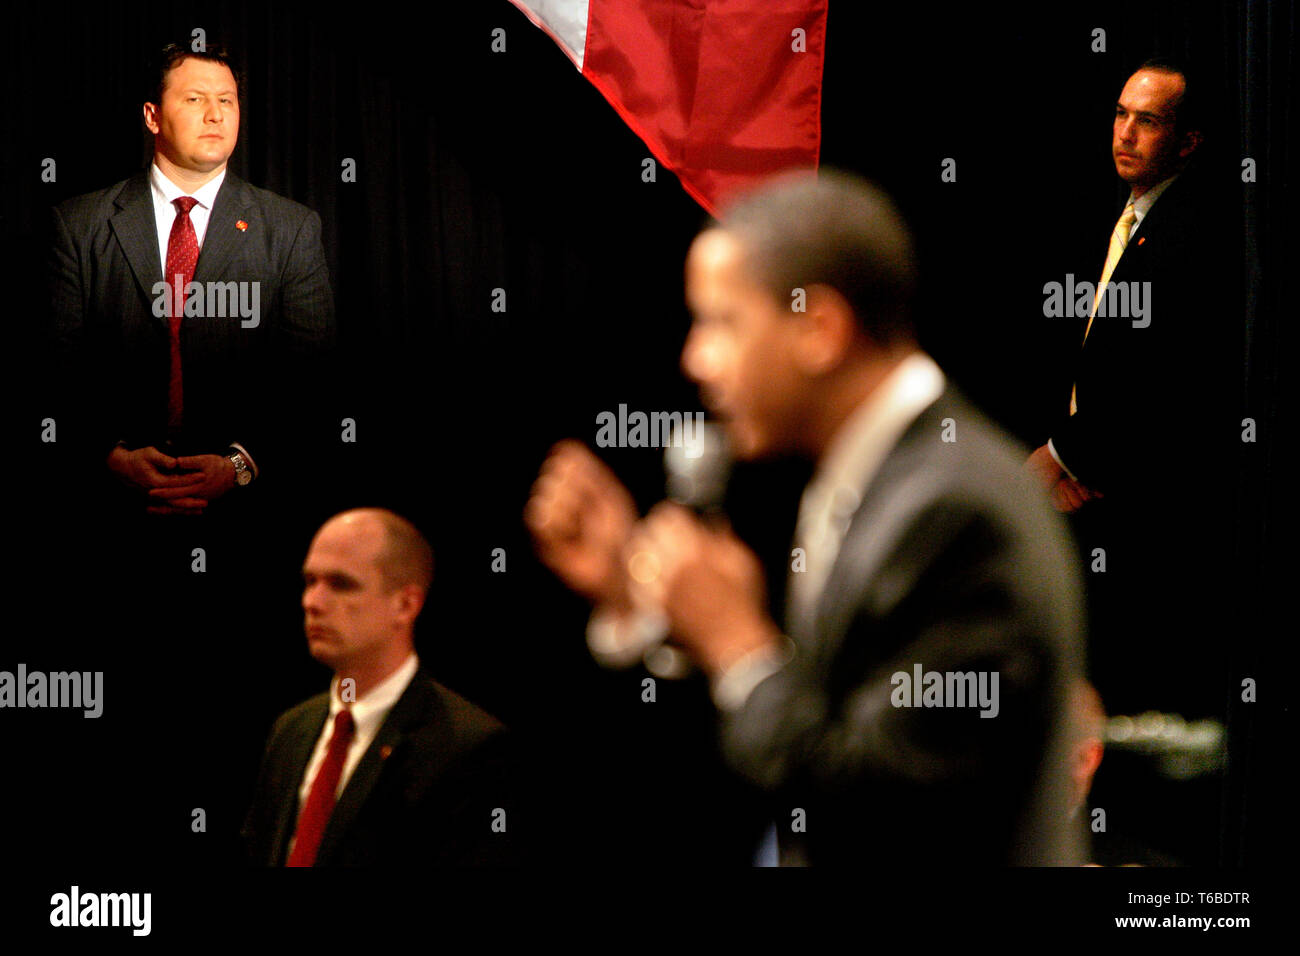 Presidential Hopeful Barack Obama (D) speaking at a townhall meeting in Parma Heights. Stock Photo